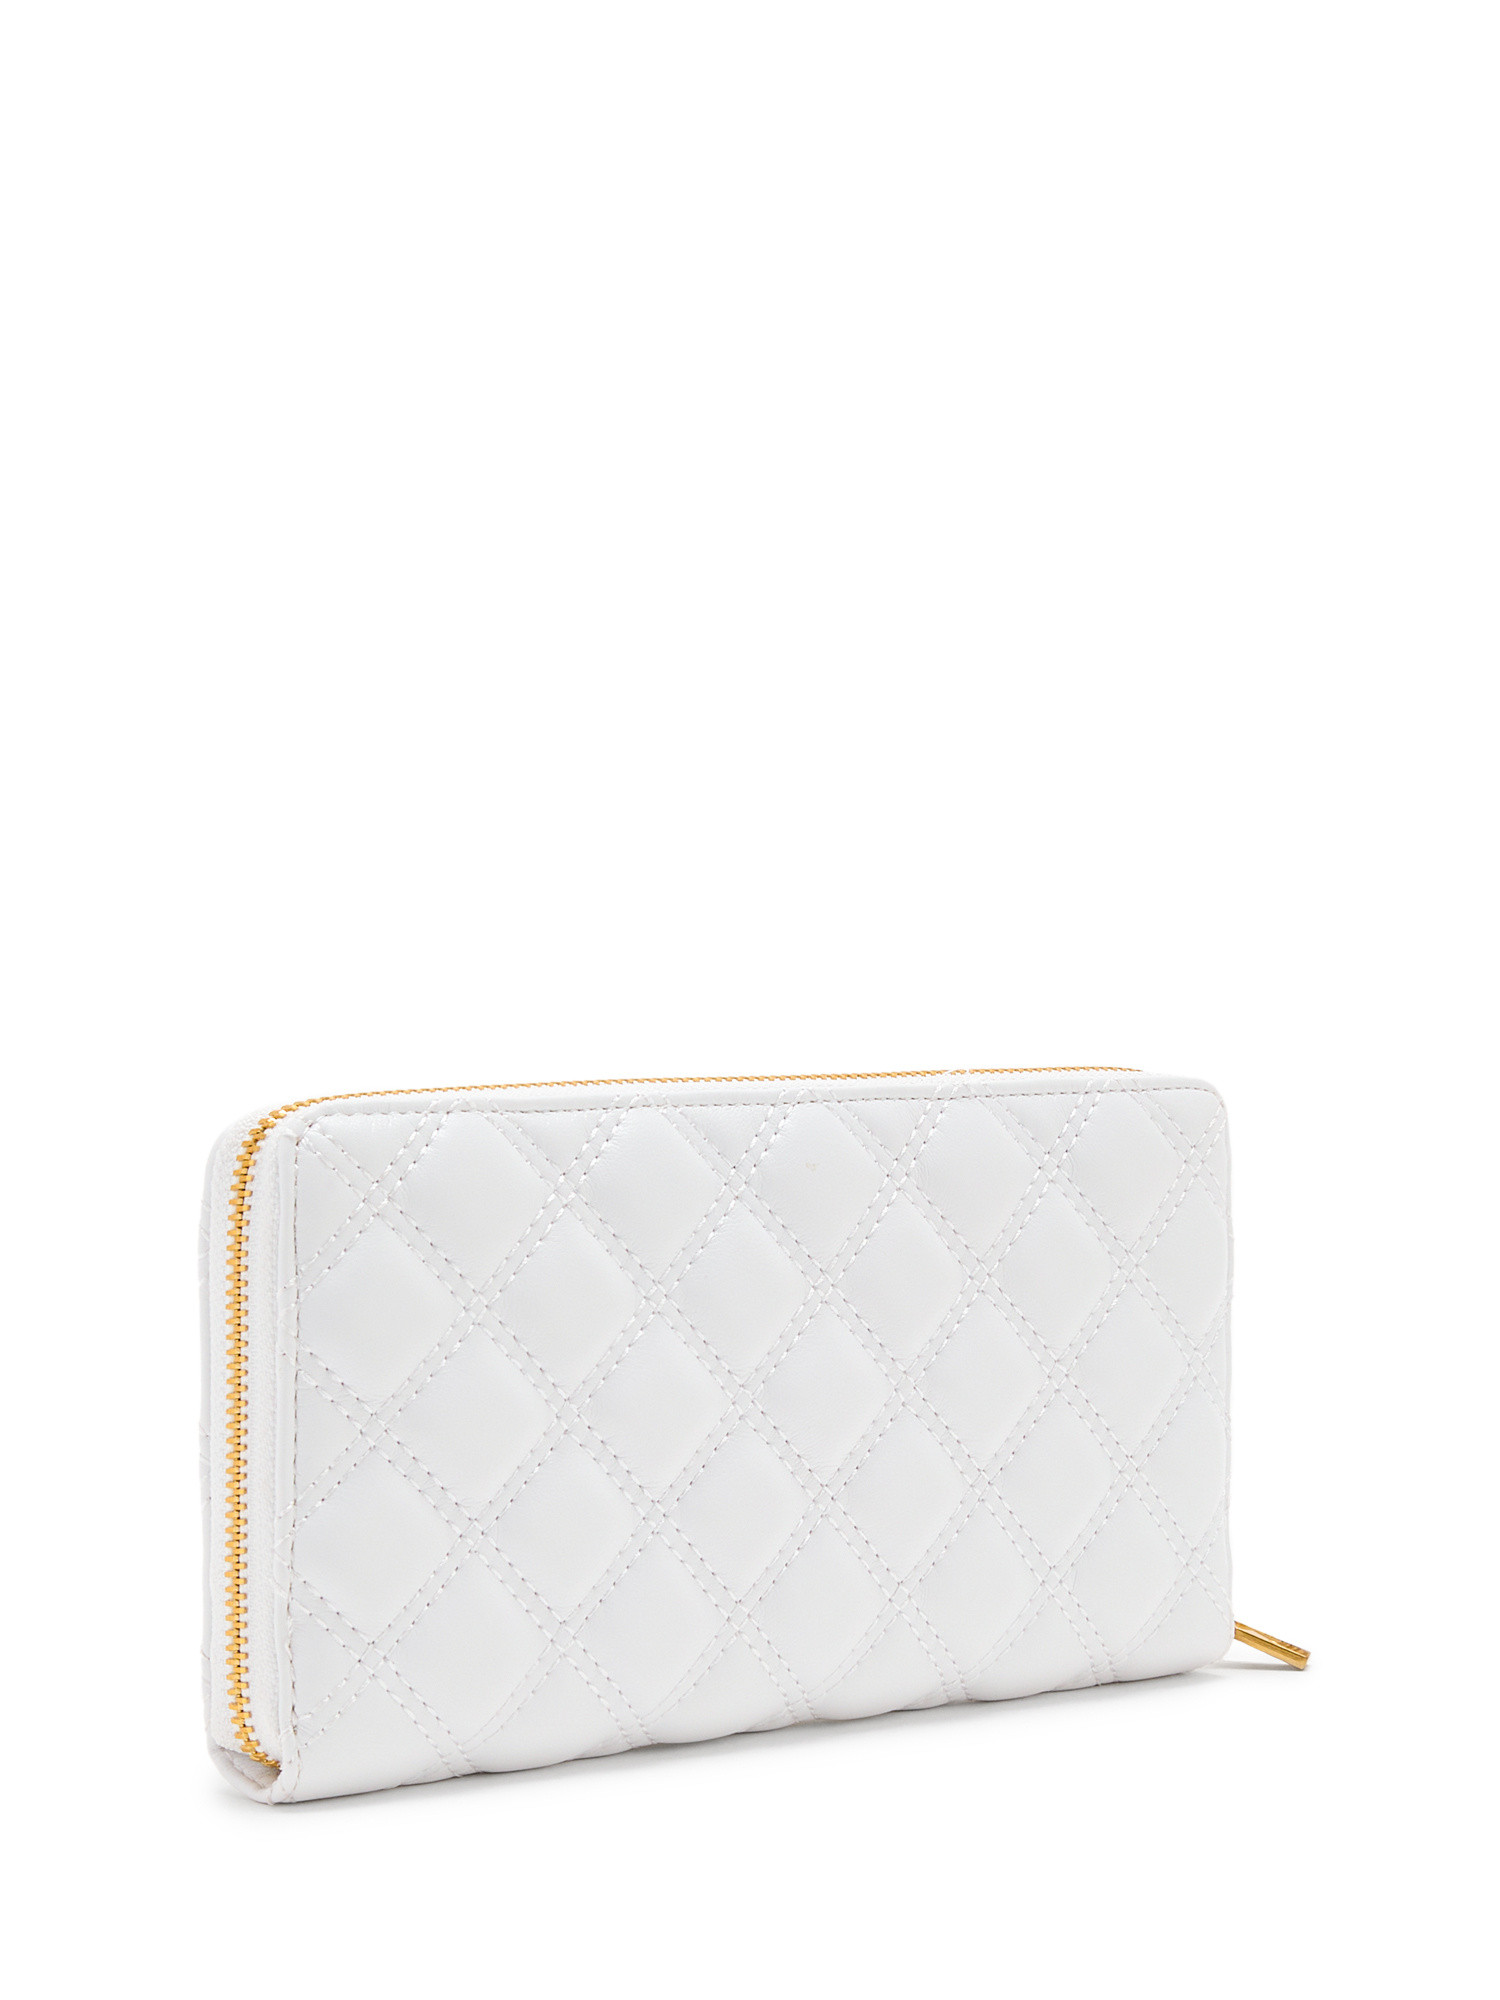 Guess - Giully maxi wallet, White, large image number 1